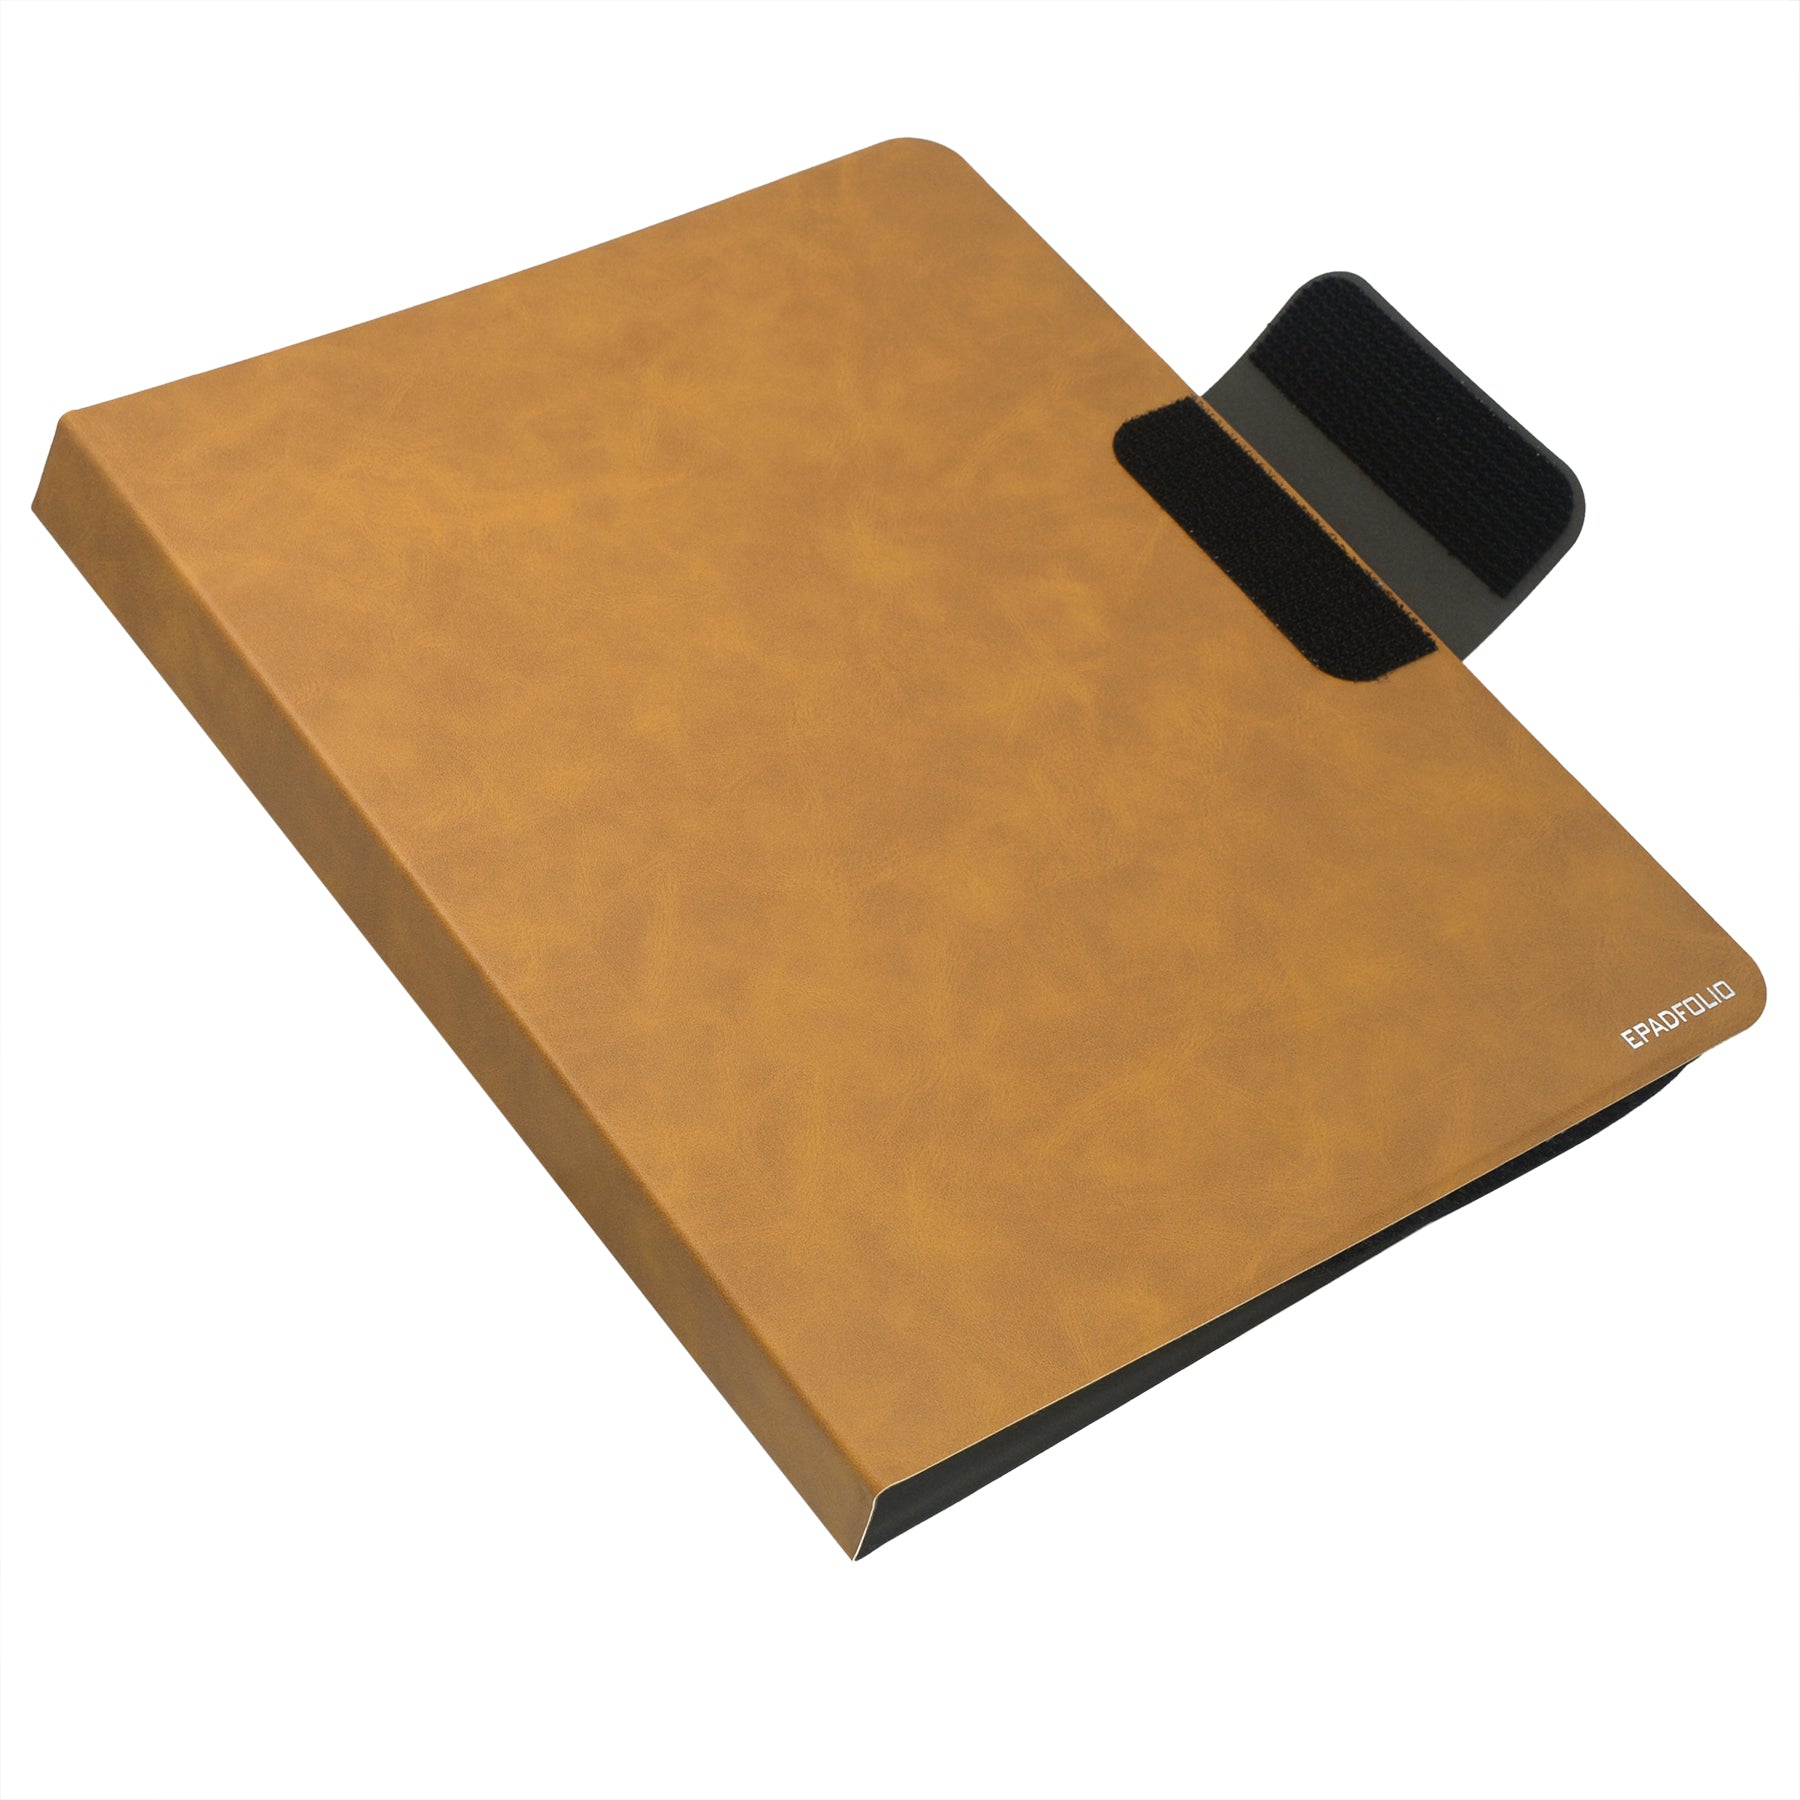 Padfolio Case with Whiteboard Clipboard and Document Pocket